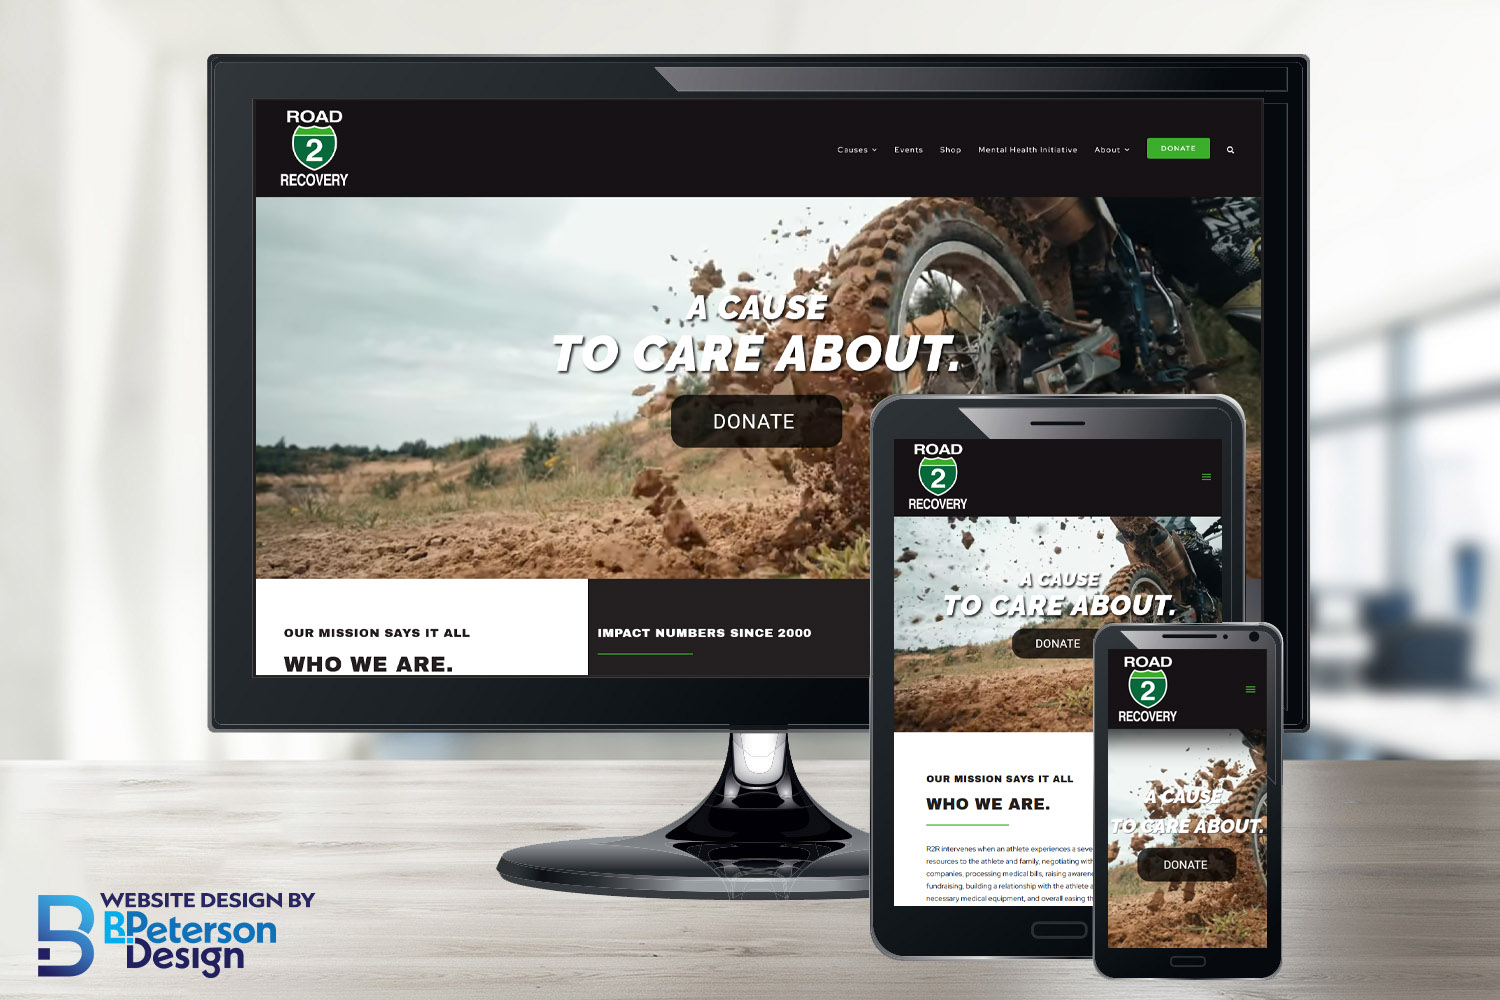 Road 2 Recovery's new responsive website displayed on different platforms.